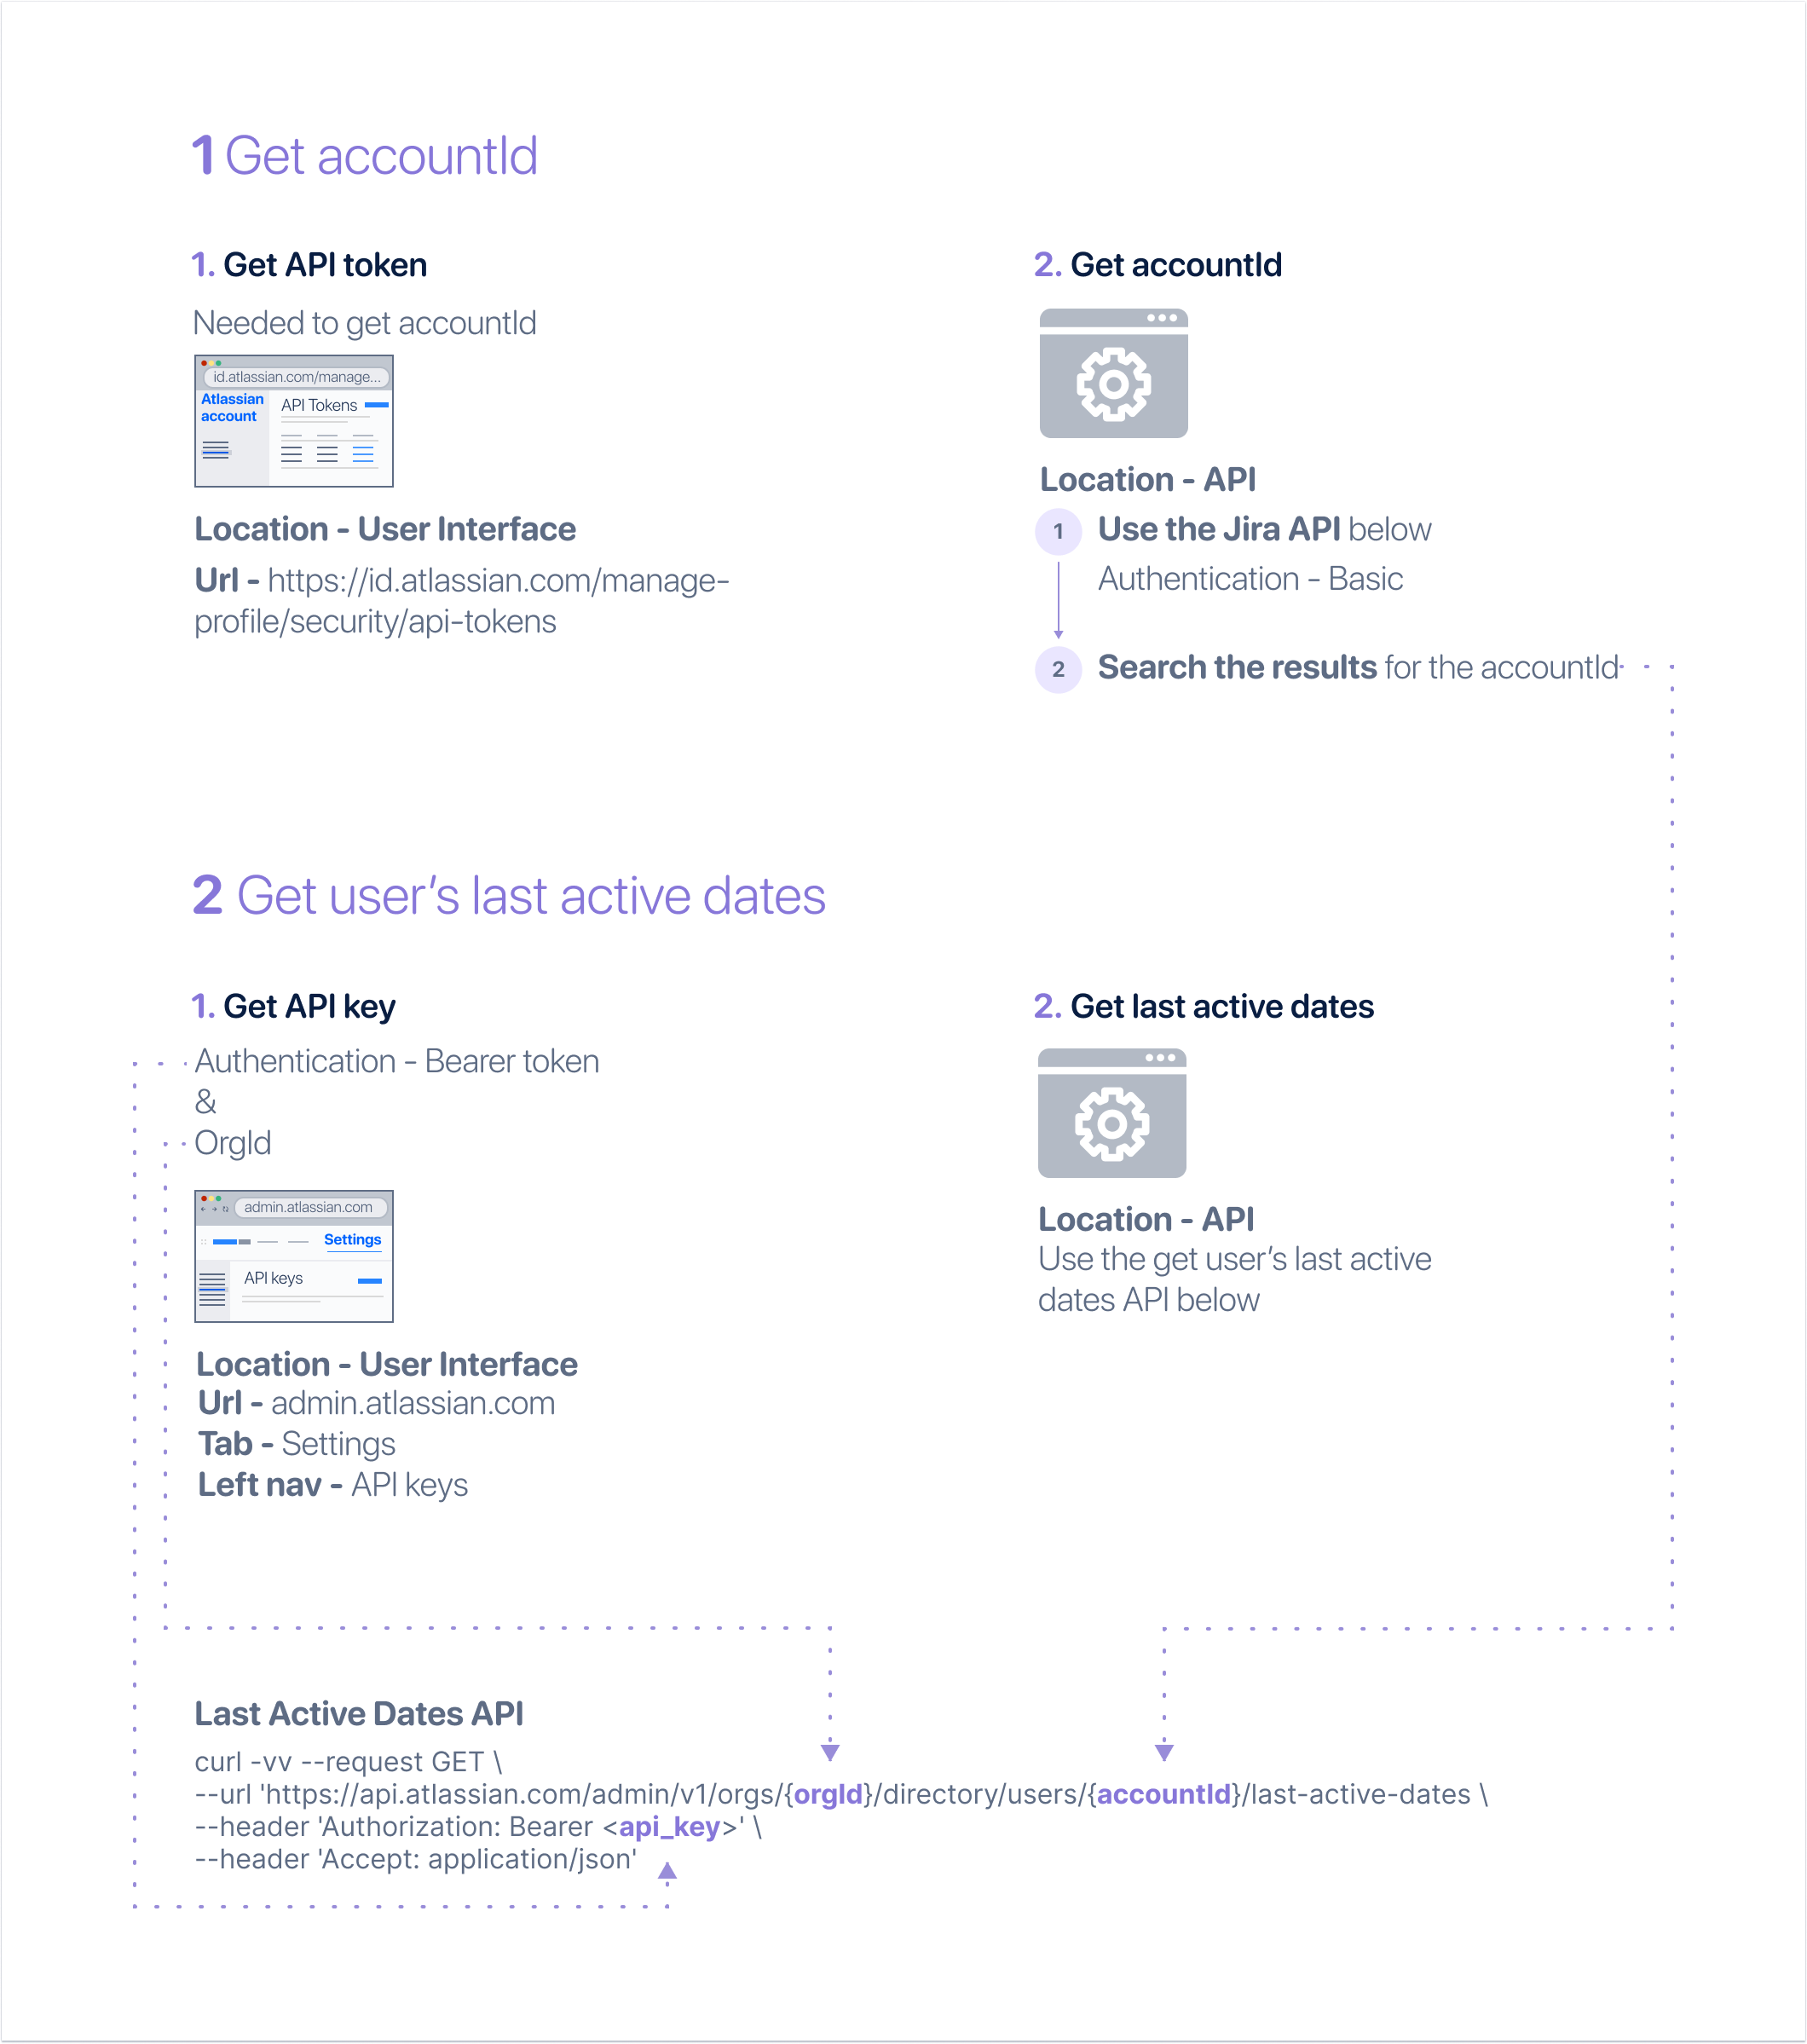 Illustration showing the steps to get users last active dates